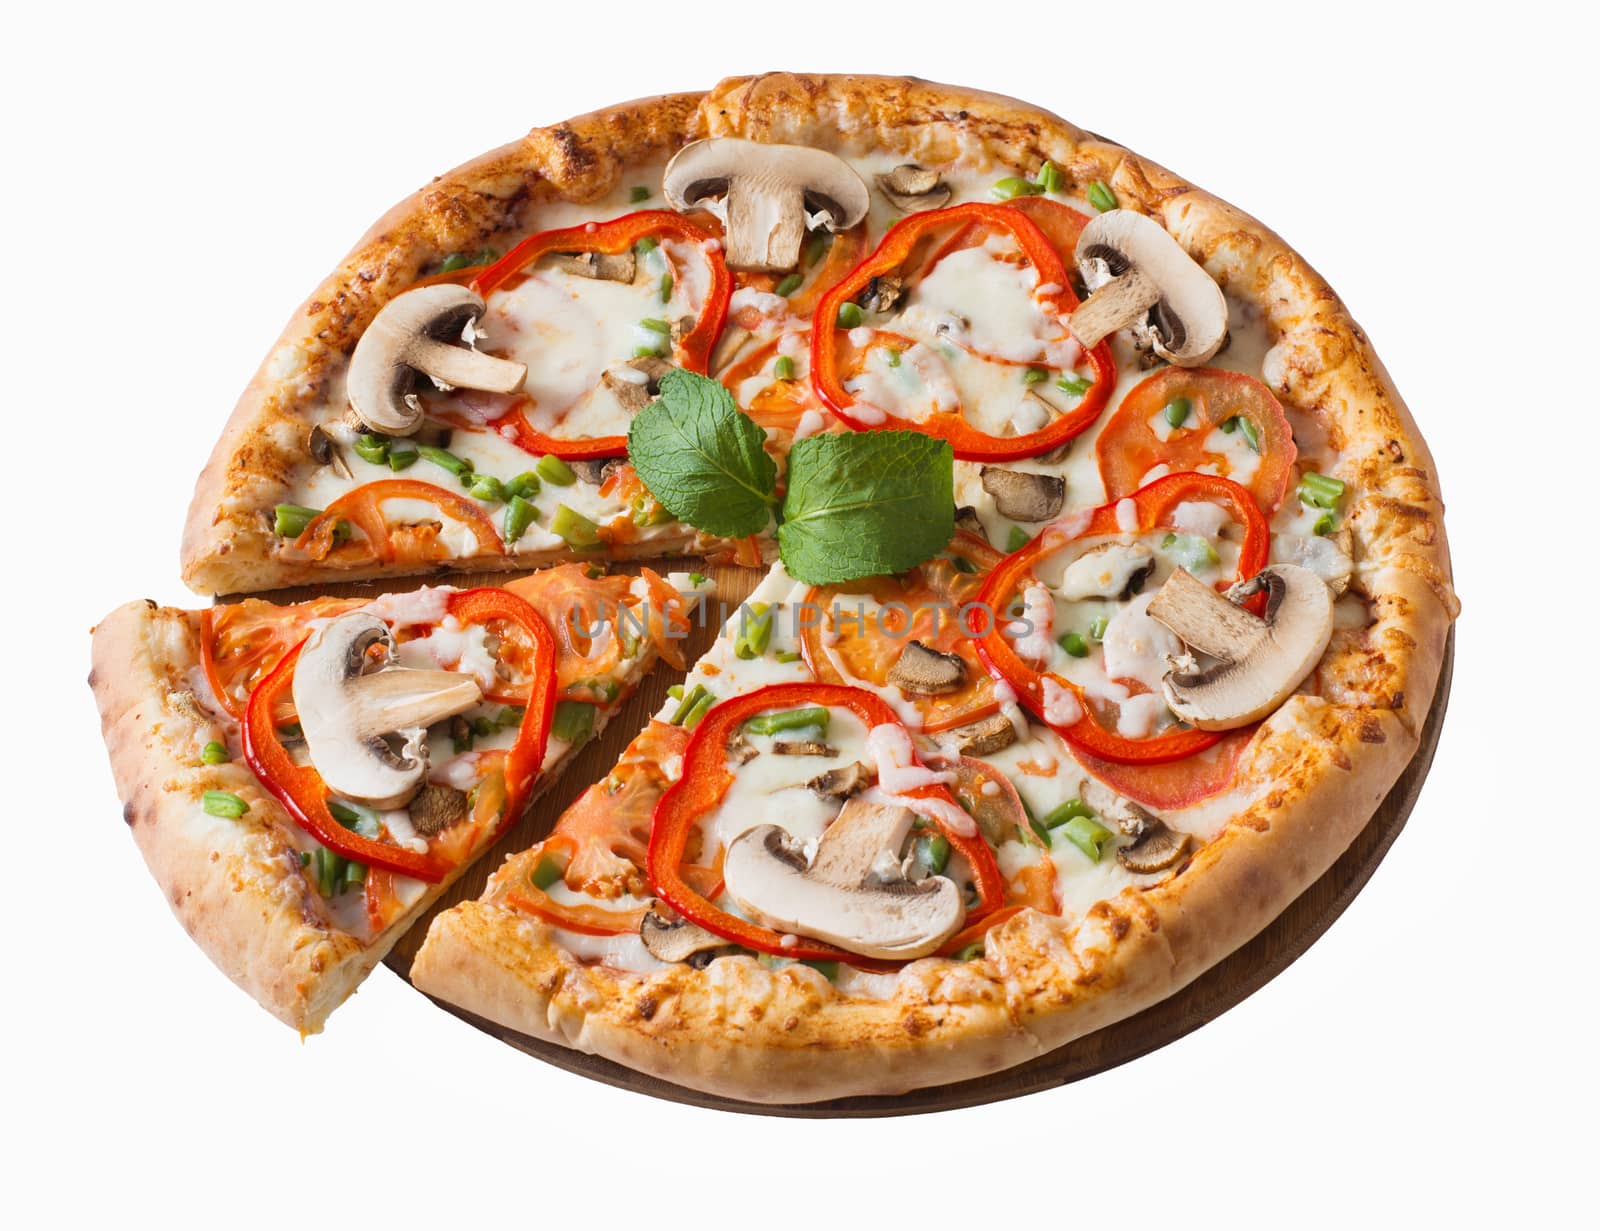 Tasty pizza with mushrooms and vegetables  isolated  by kzen